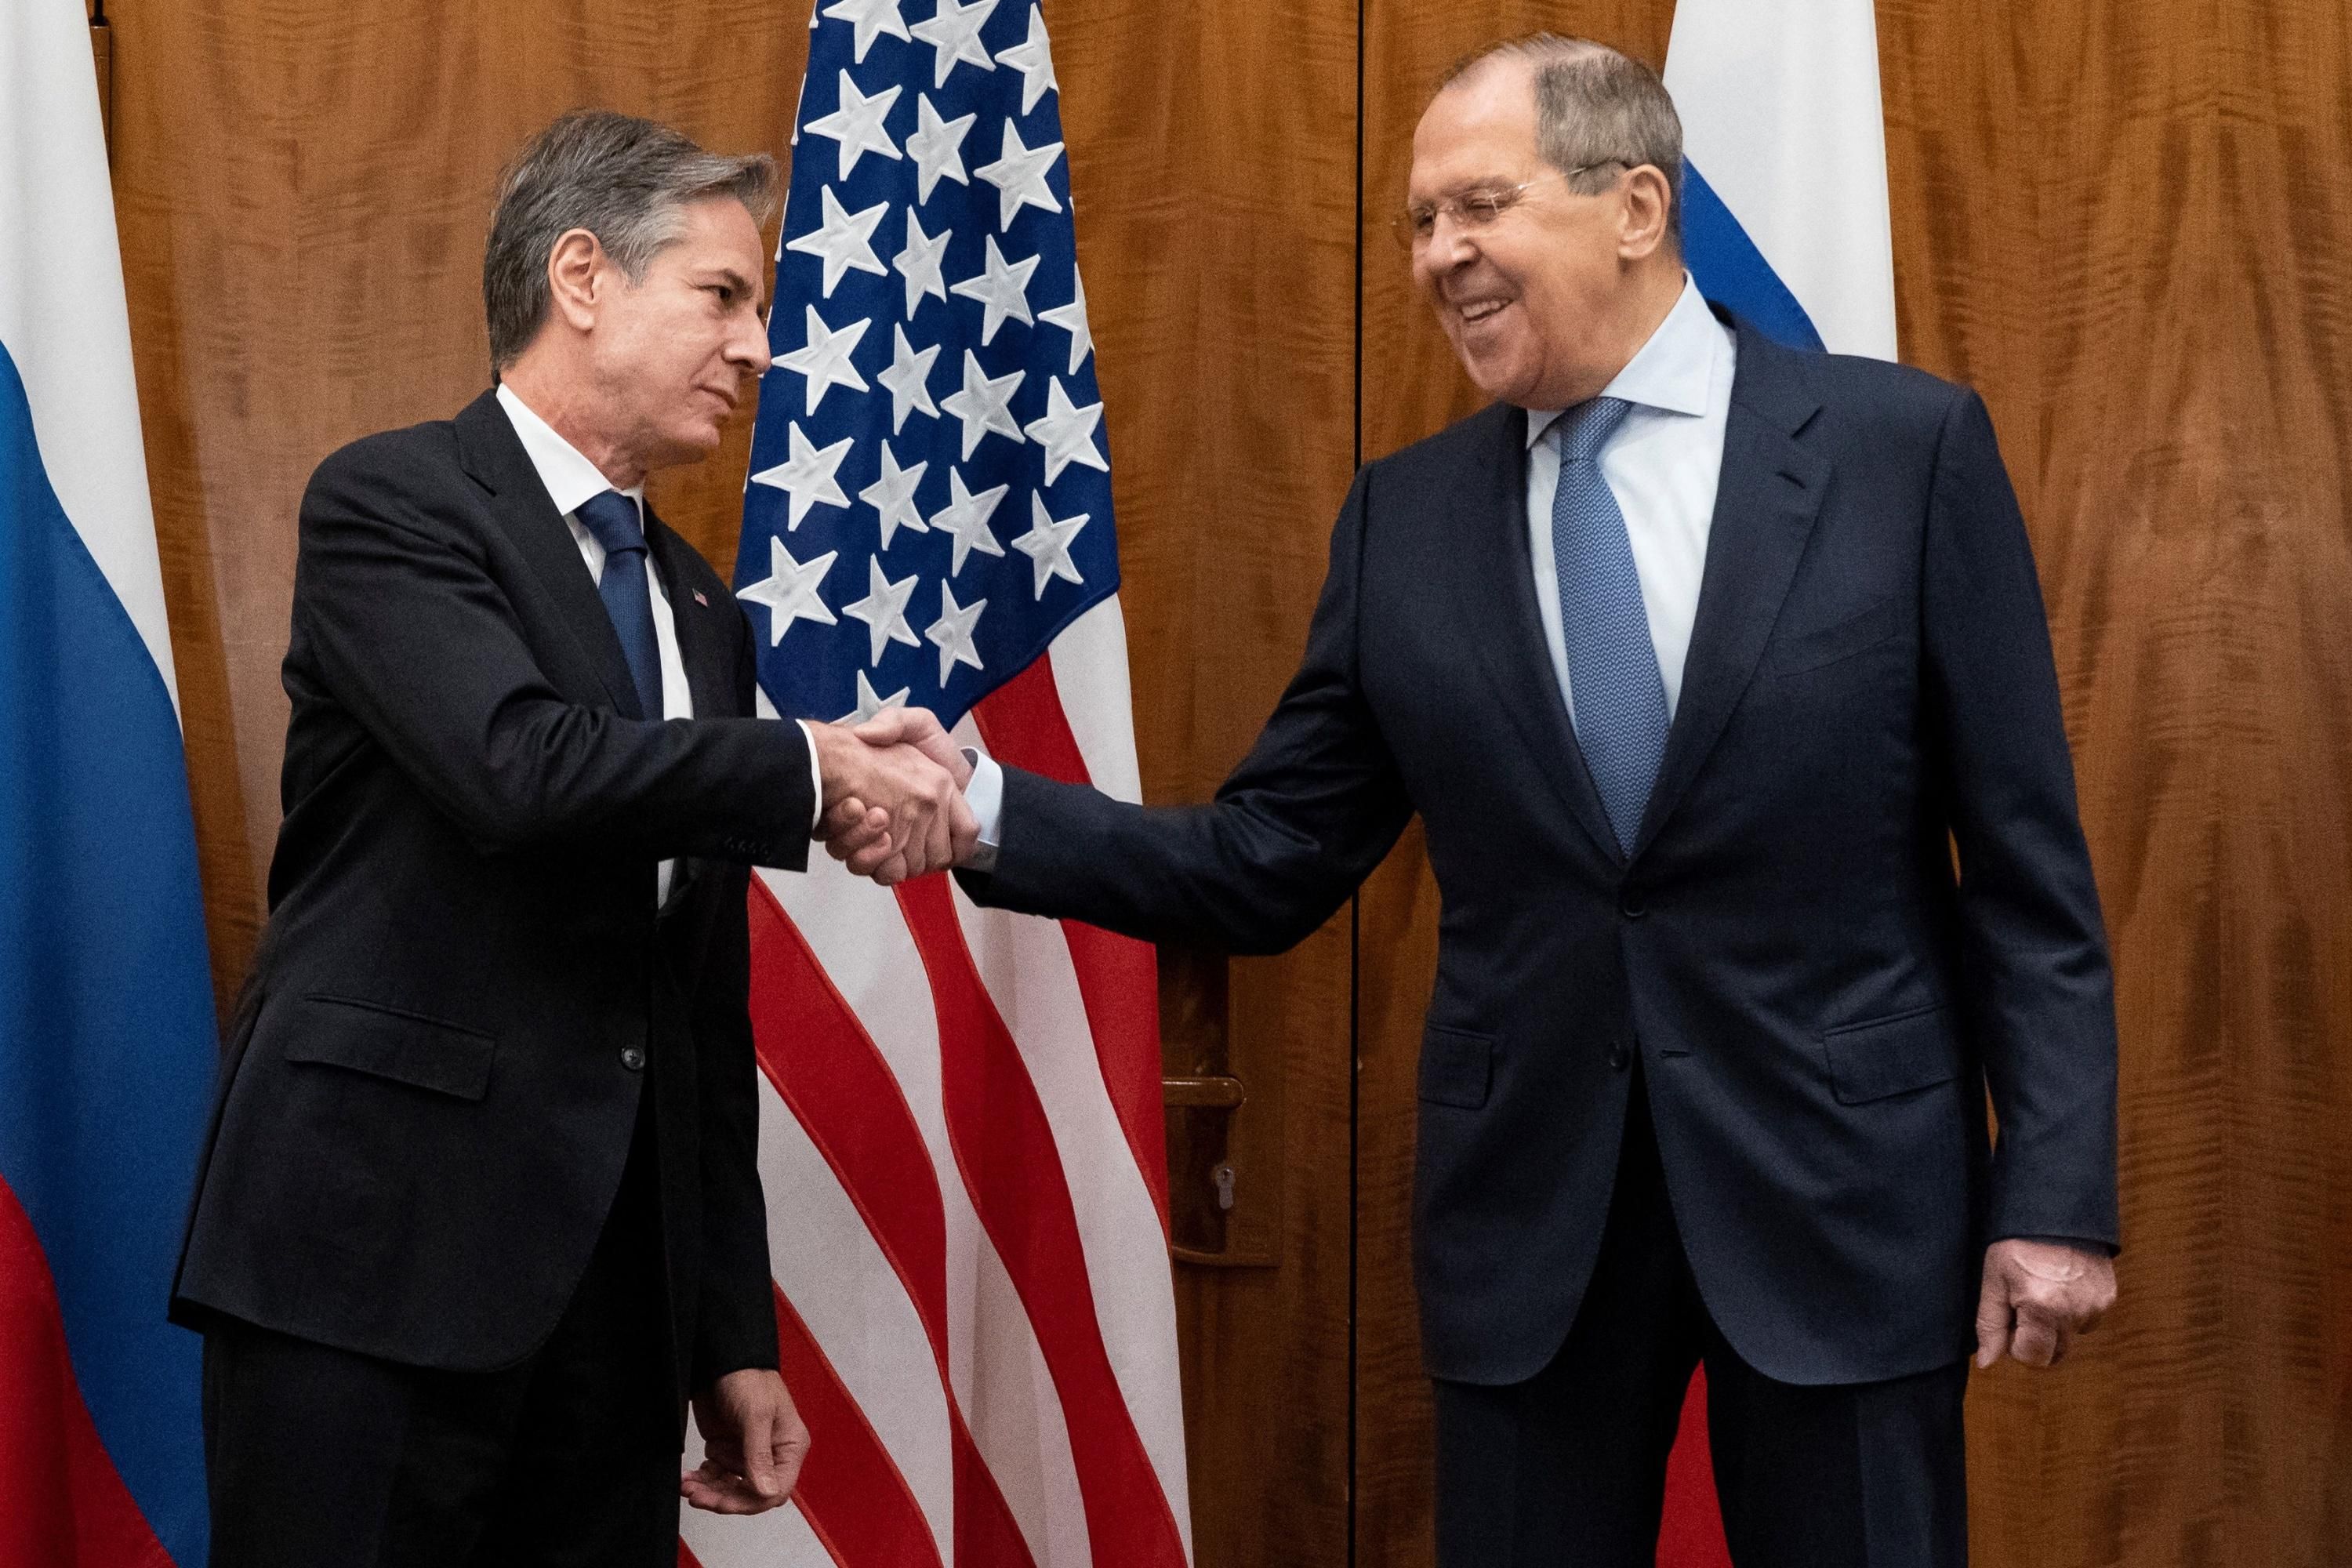 U.S. Secretary of State Antony Blinken and Russian Foreign Minister Sergey Lavrov shake hands.